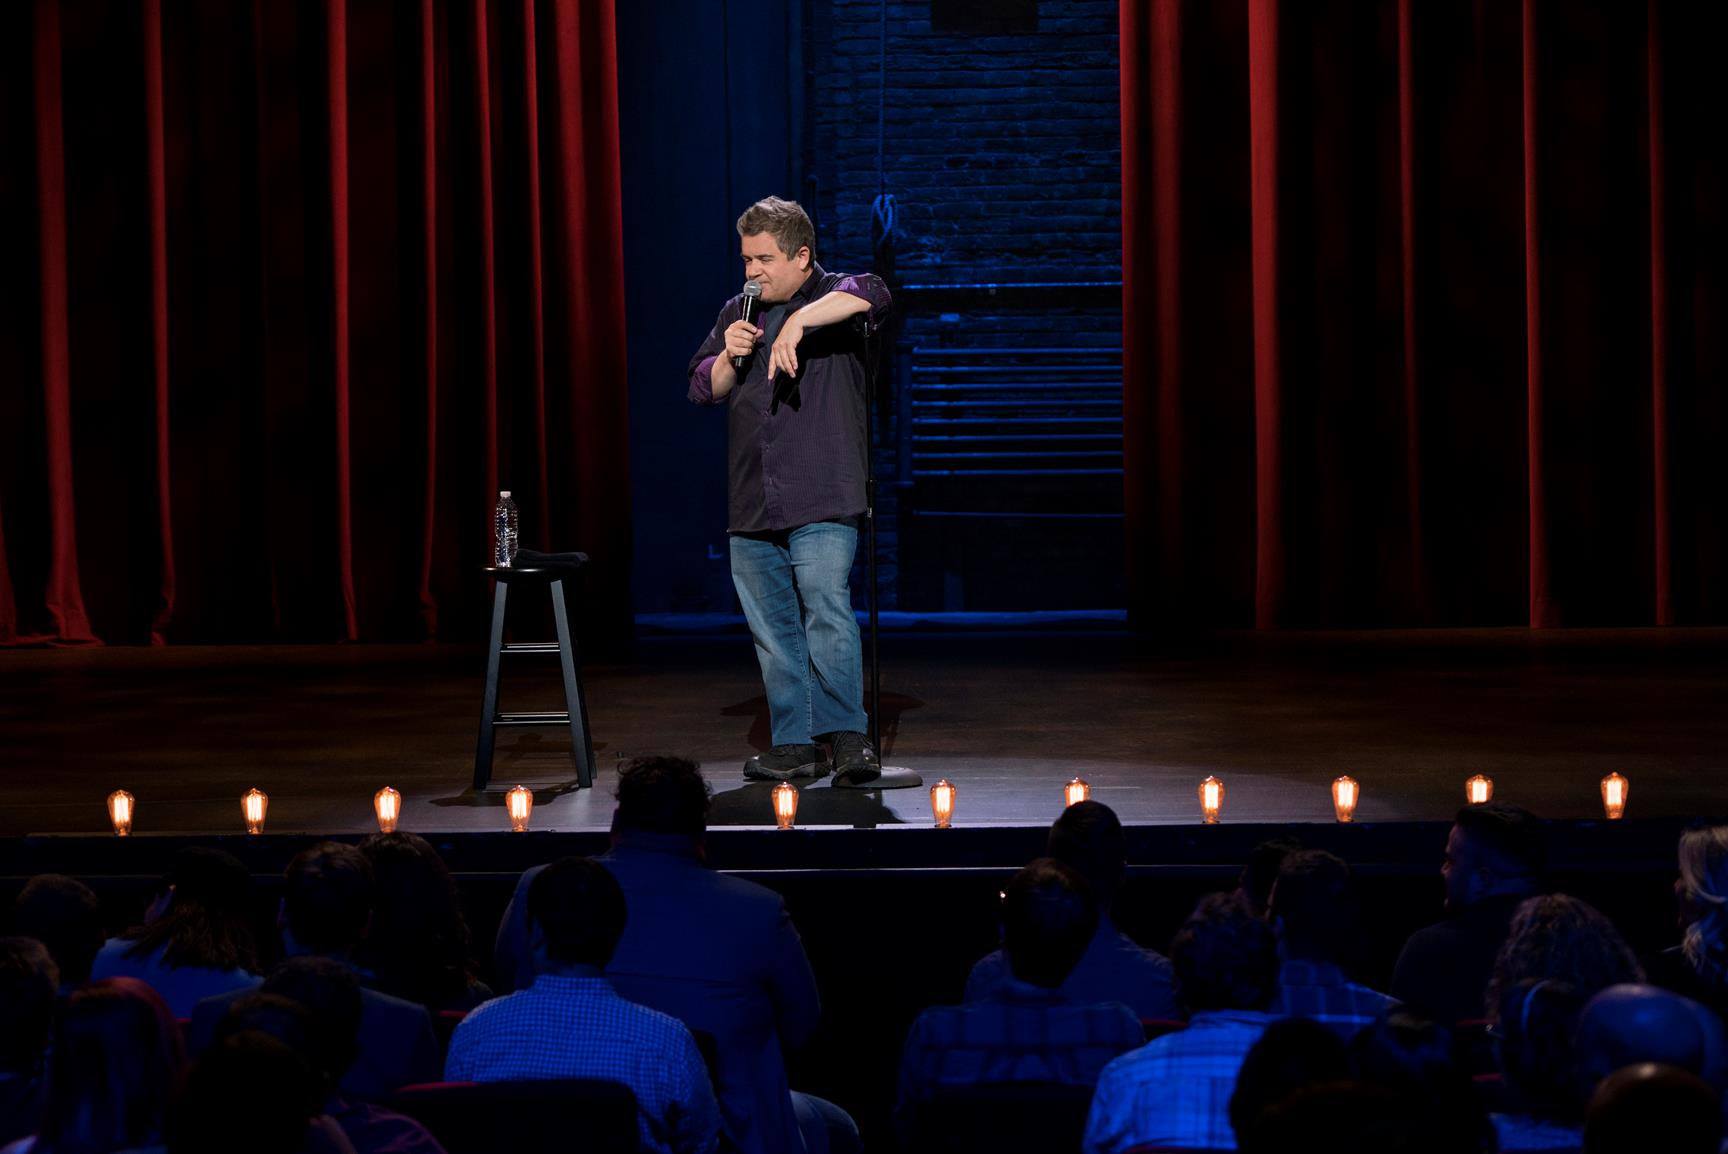 Patton Oswalt stands on stage holding a microphone